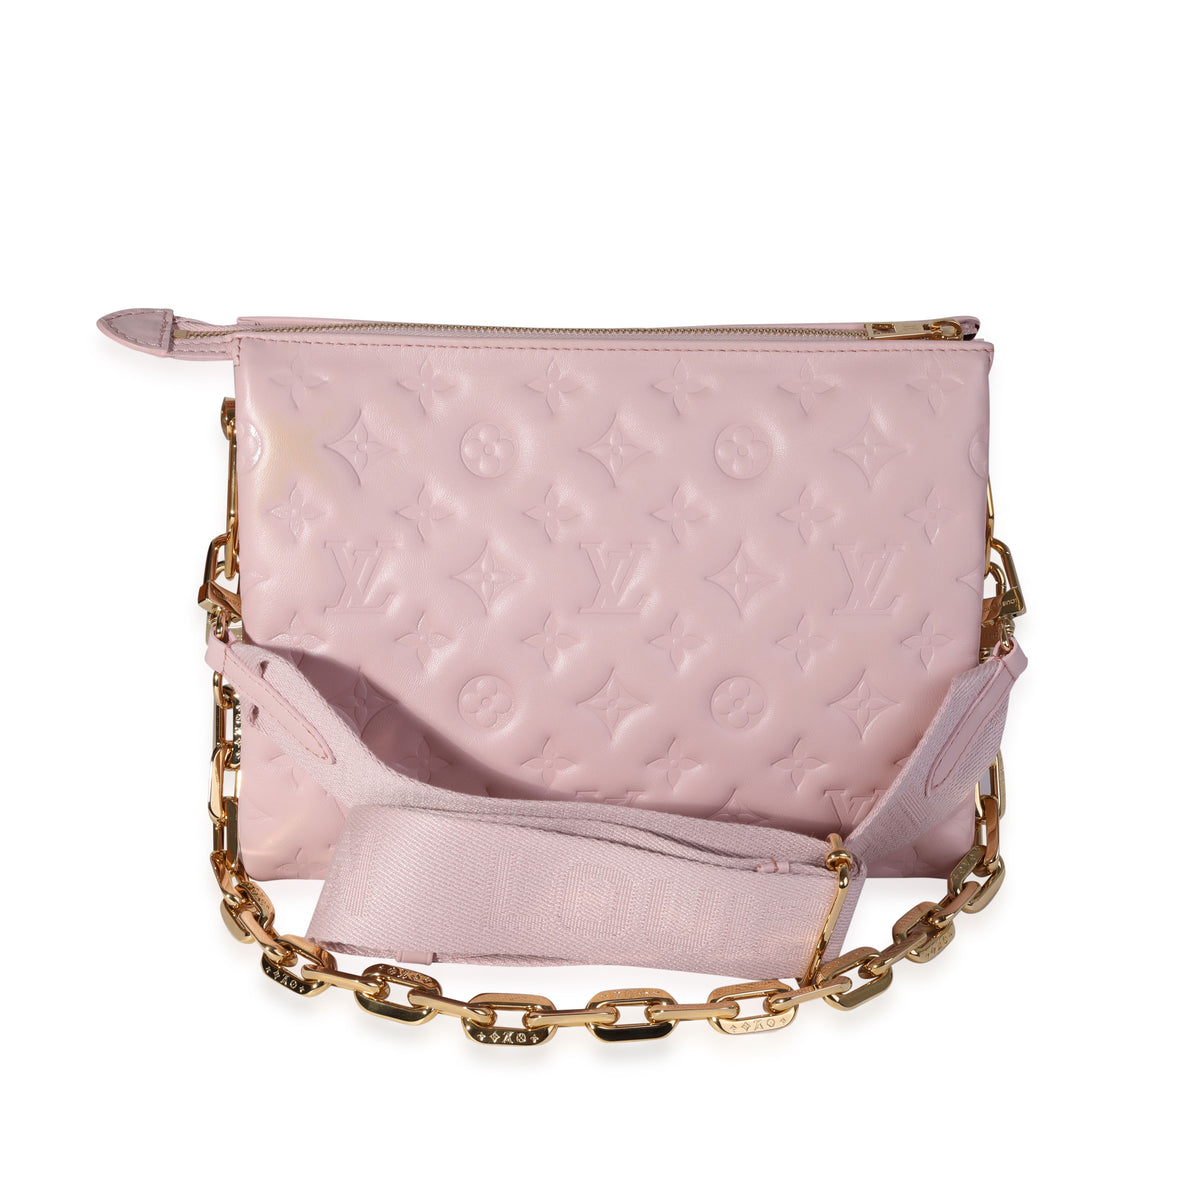 LOUIS VUITTON COUSSIN PM PINK PURPLE LAMBSKIN LEATHER GOLD CHAIN